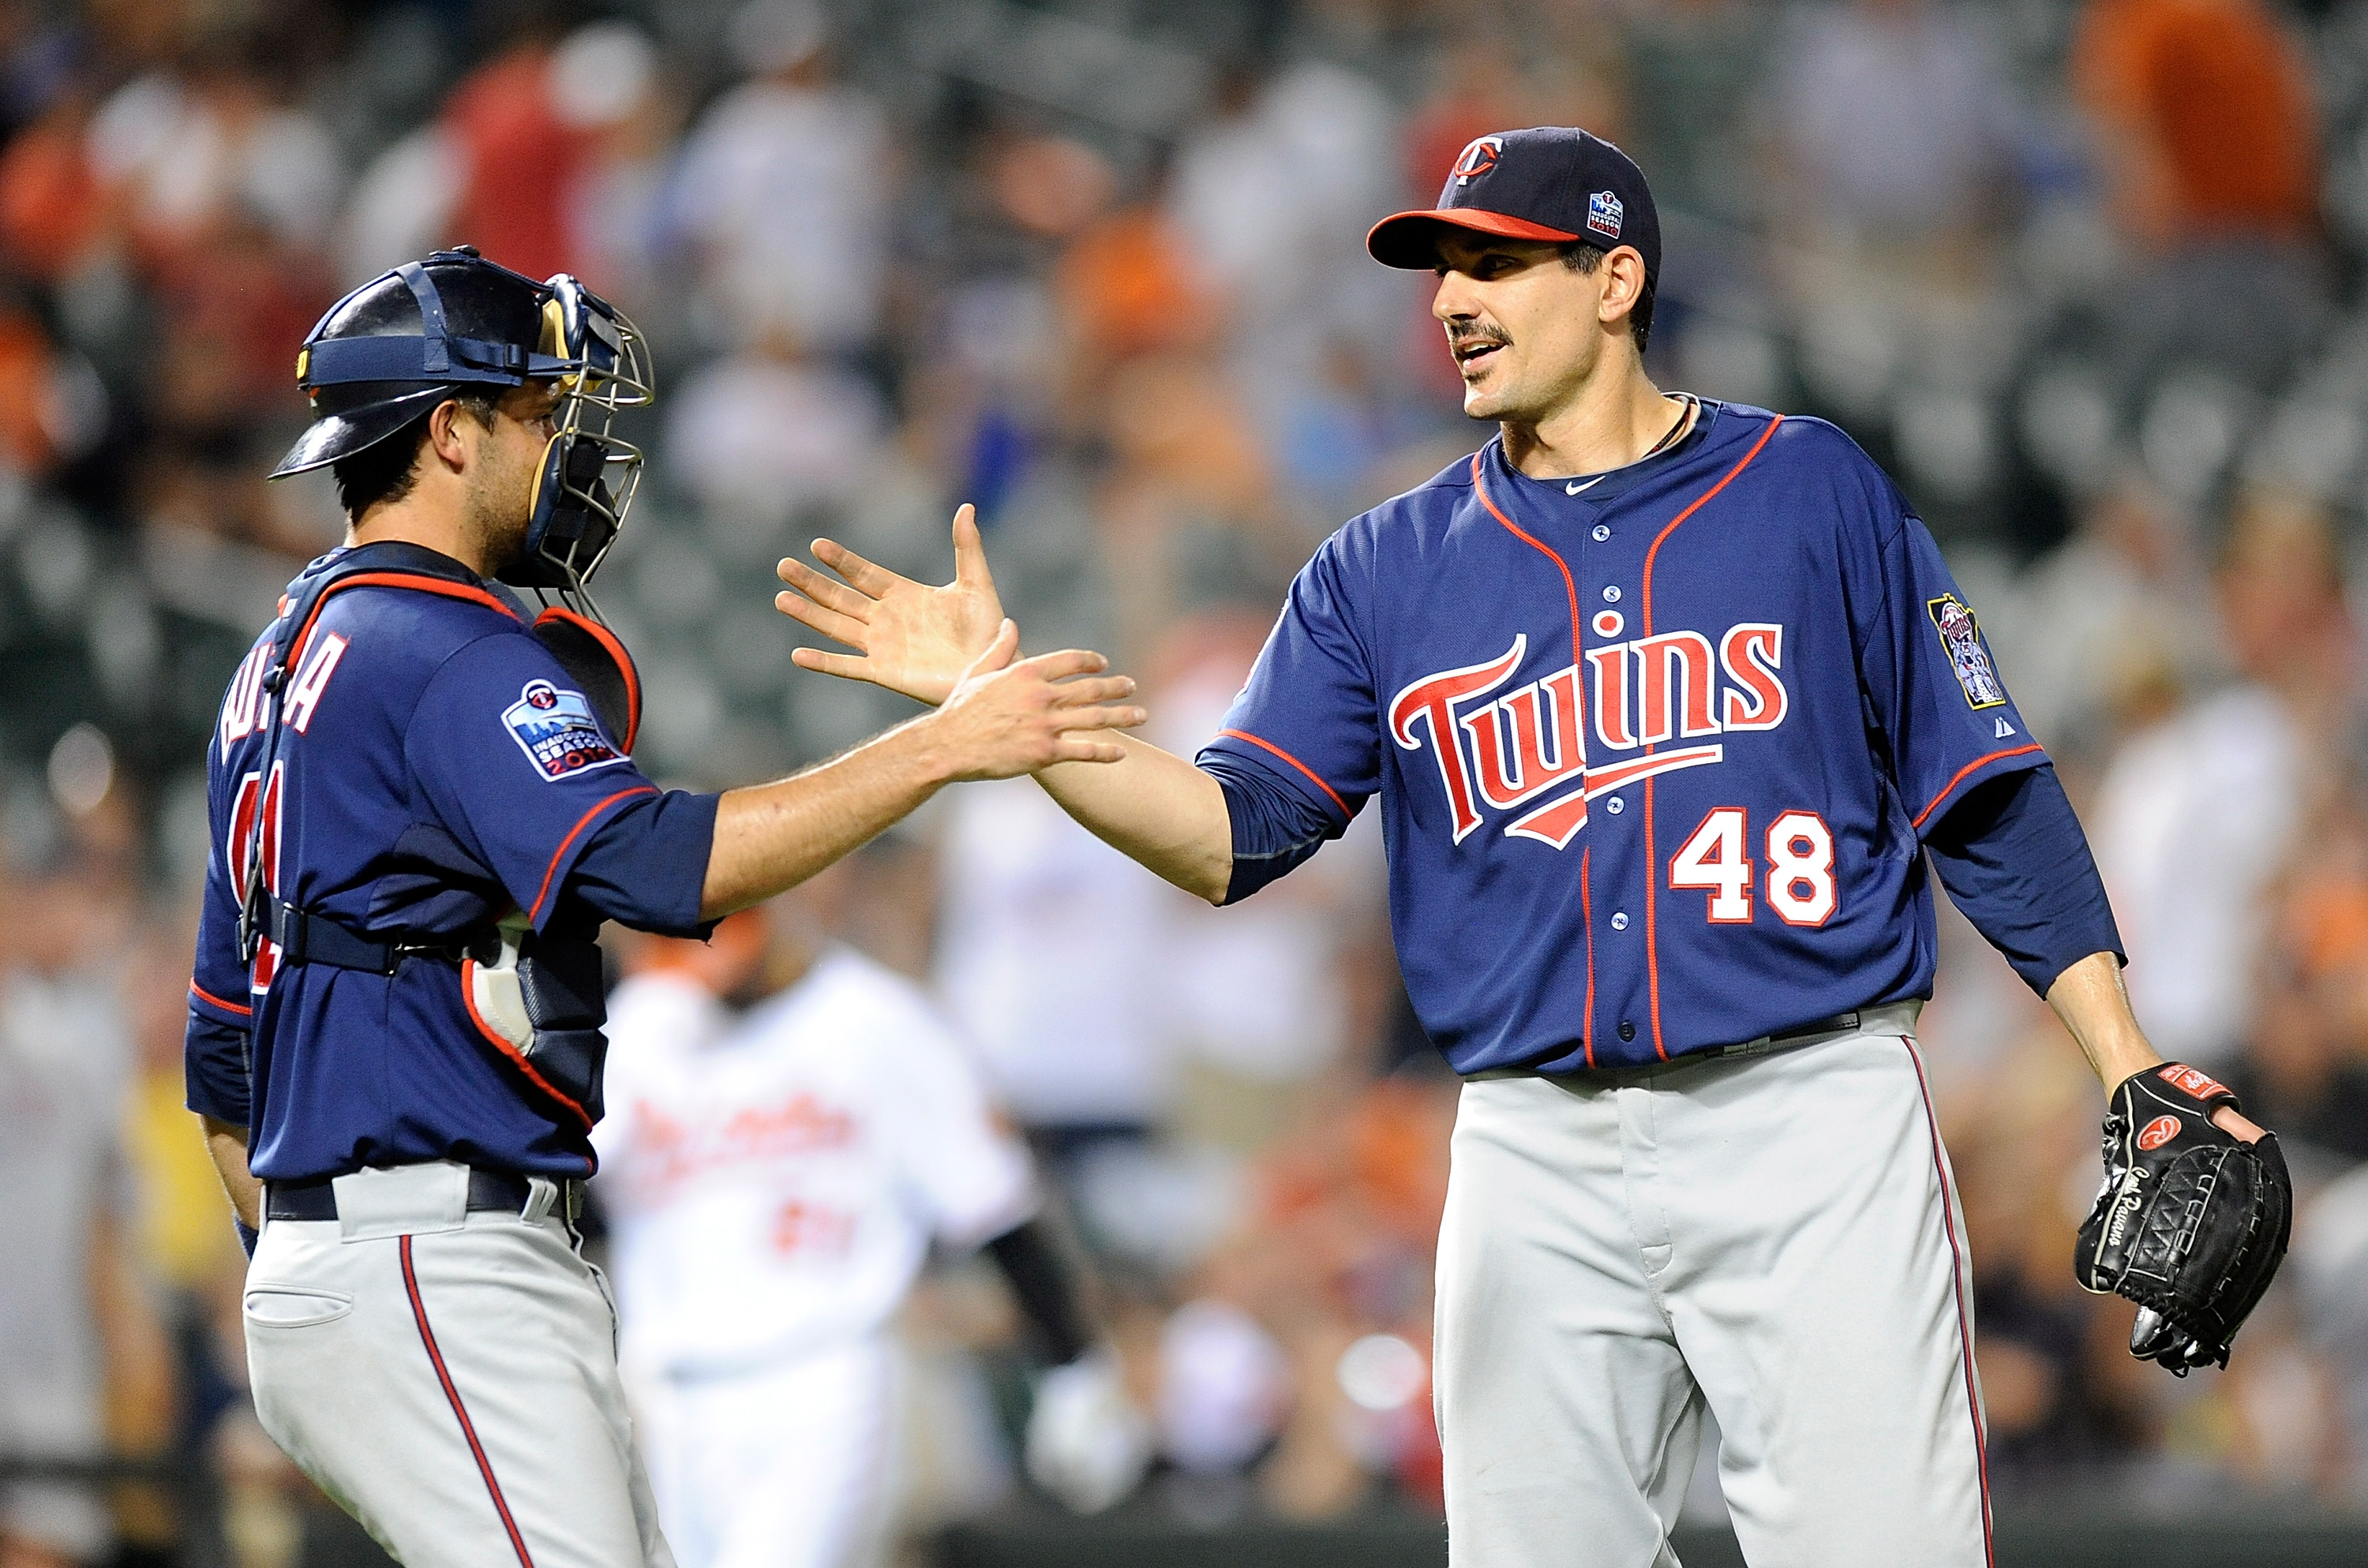 BALTIMORE - JULY 22:  Carl Pavano #48 of the Minnesota Twins celebrates with Drew Butera #41 after pitching a complete game shutout against the Baltimore Orioles at Camden Yards on July 22, 2010 in Baltimore, Maryland.  The Twins won the game 5-0. (Photo